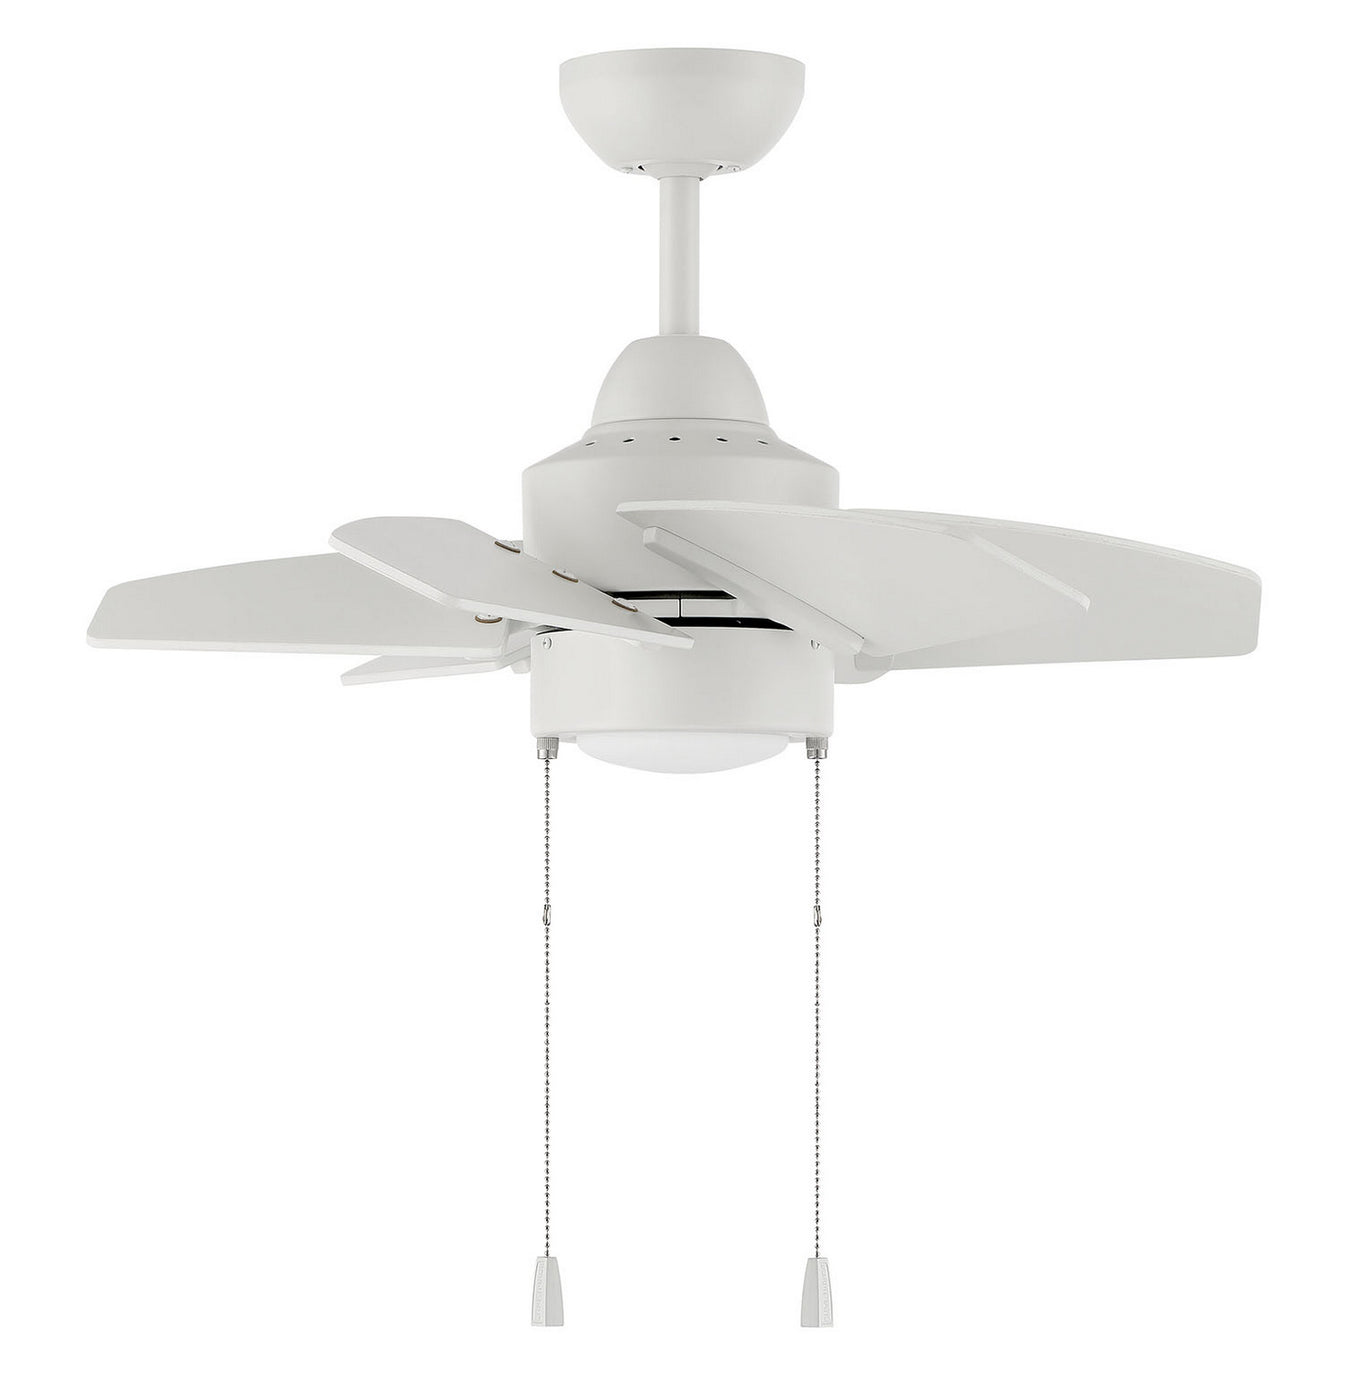 Propel II 24" Ceiling Fan in White from Craftmade, item number PPT24W6